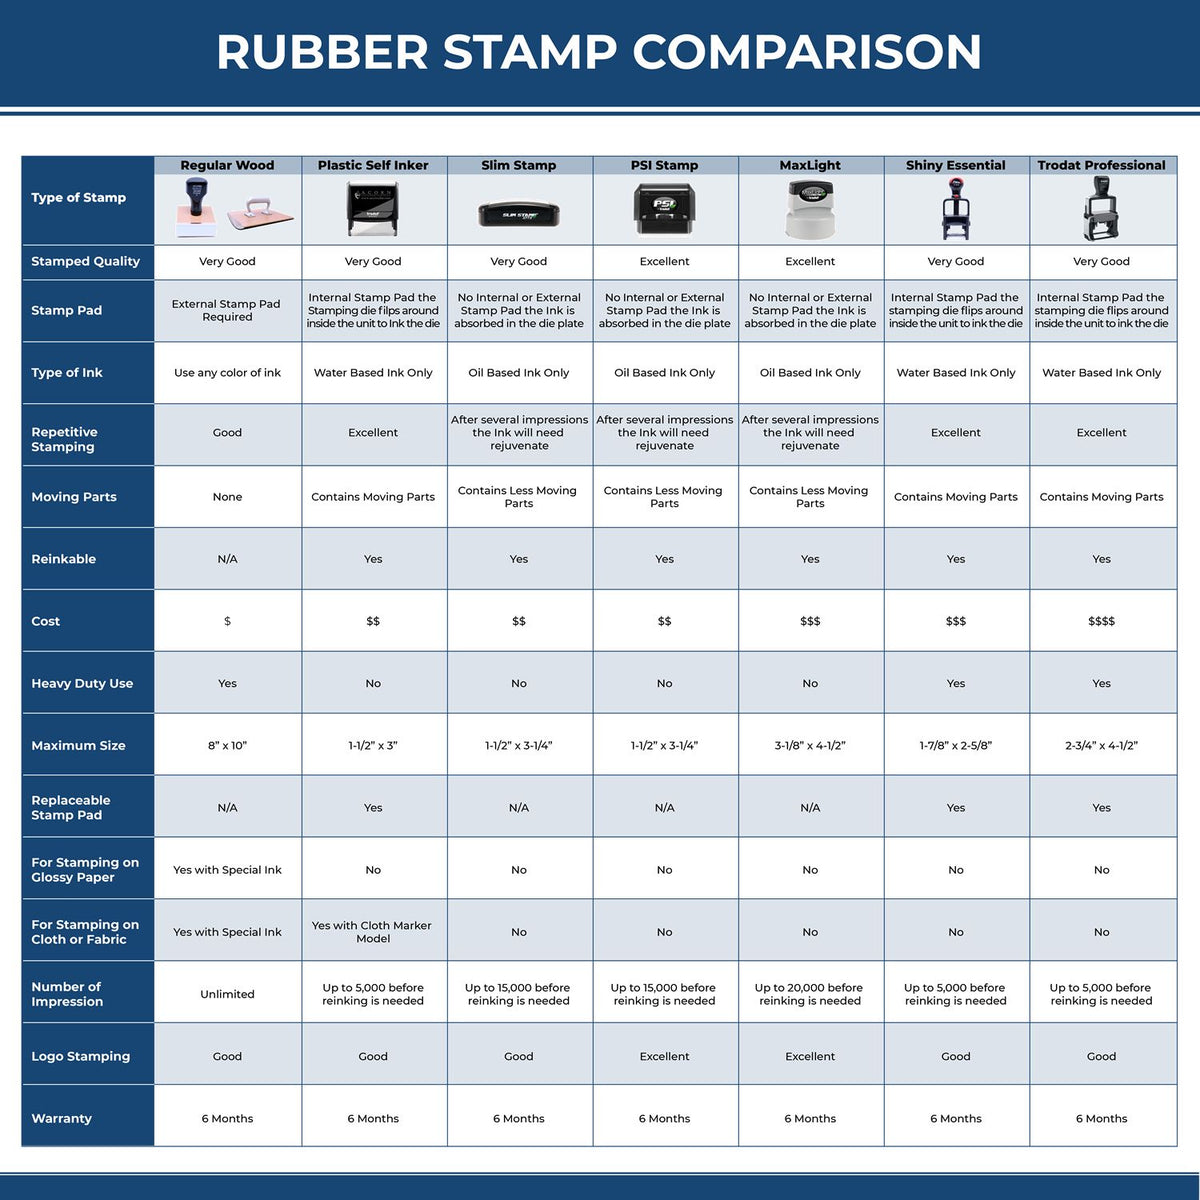 Large Self Inking Red Credit Stamp 4501S Rubber Stamp Comparison